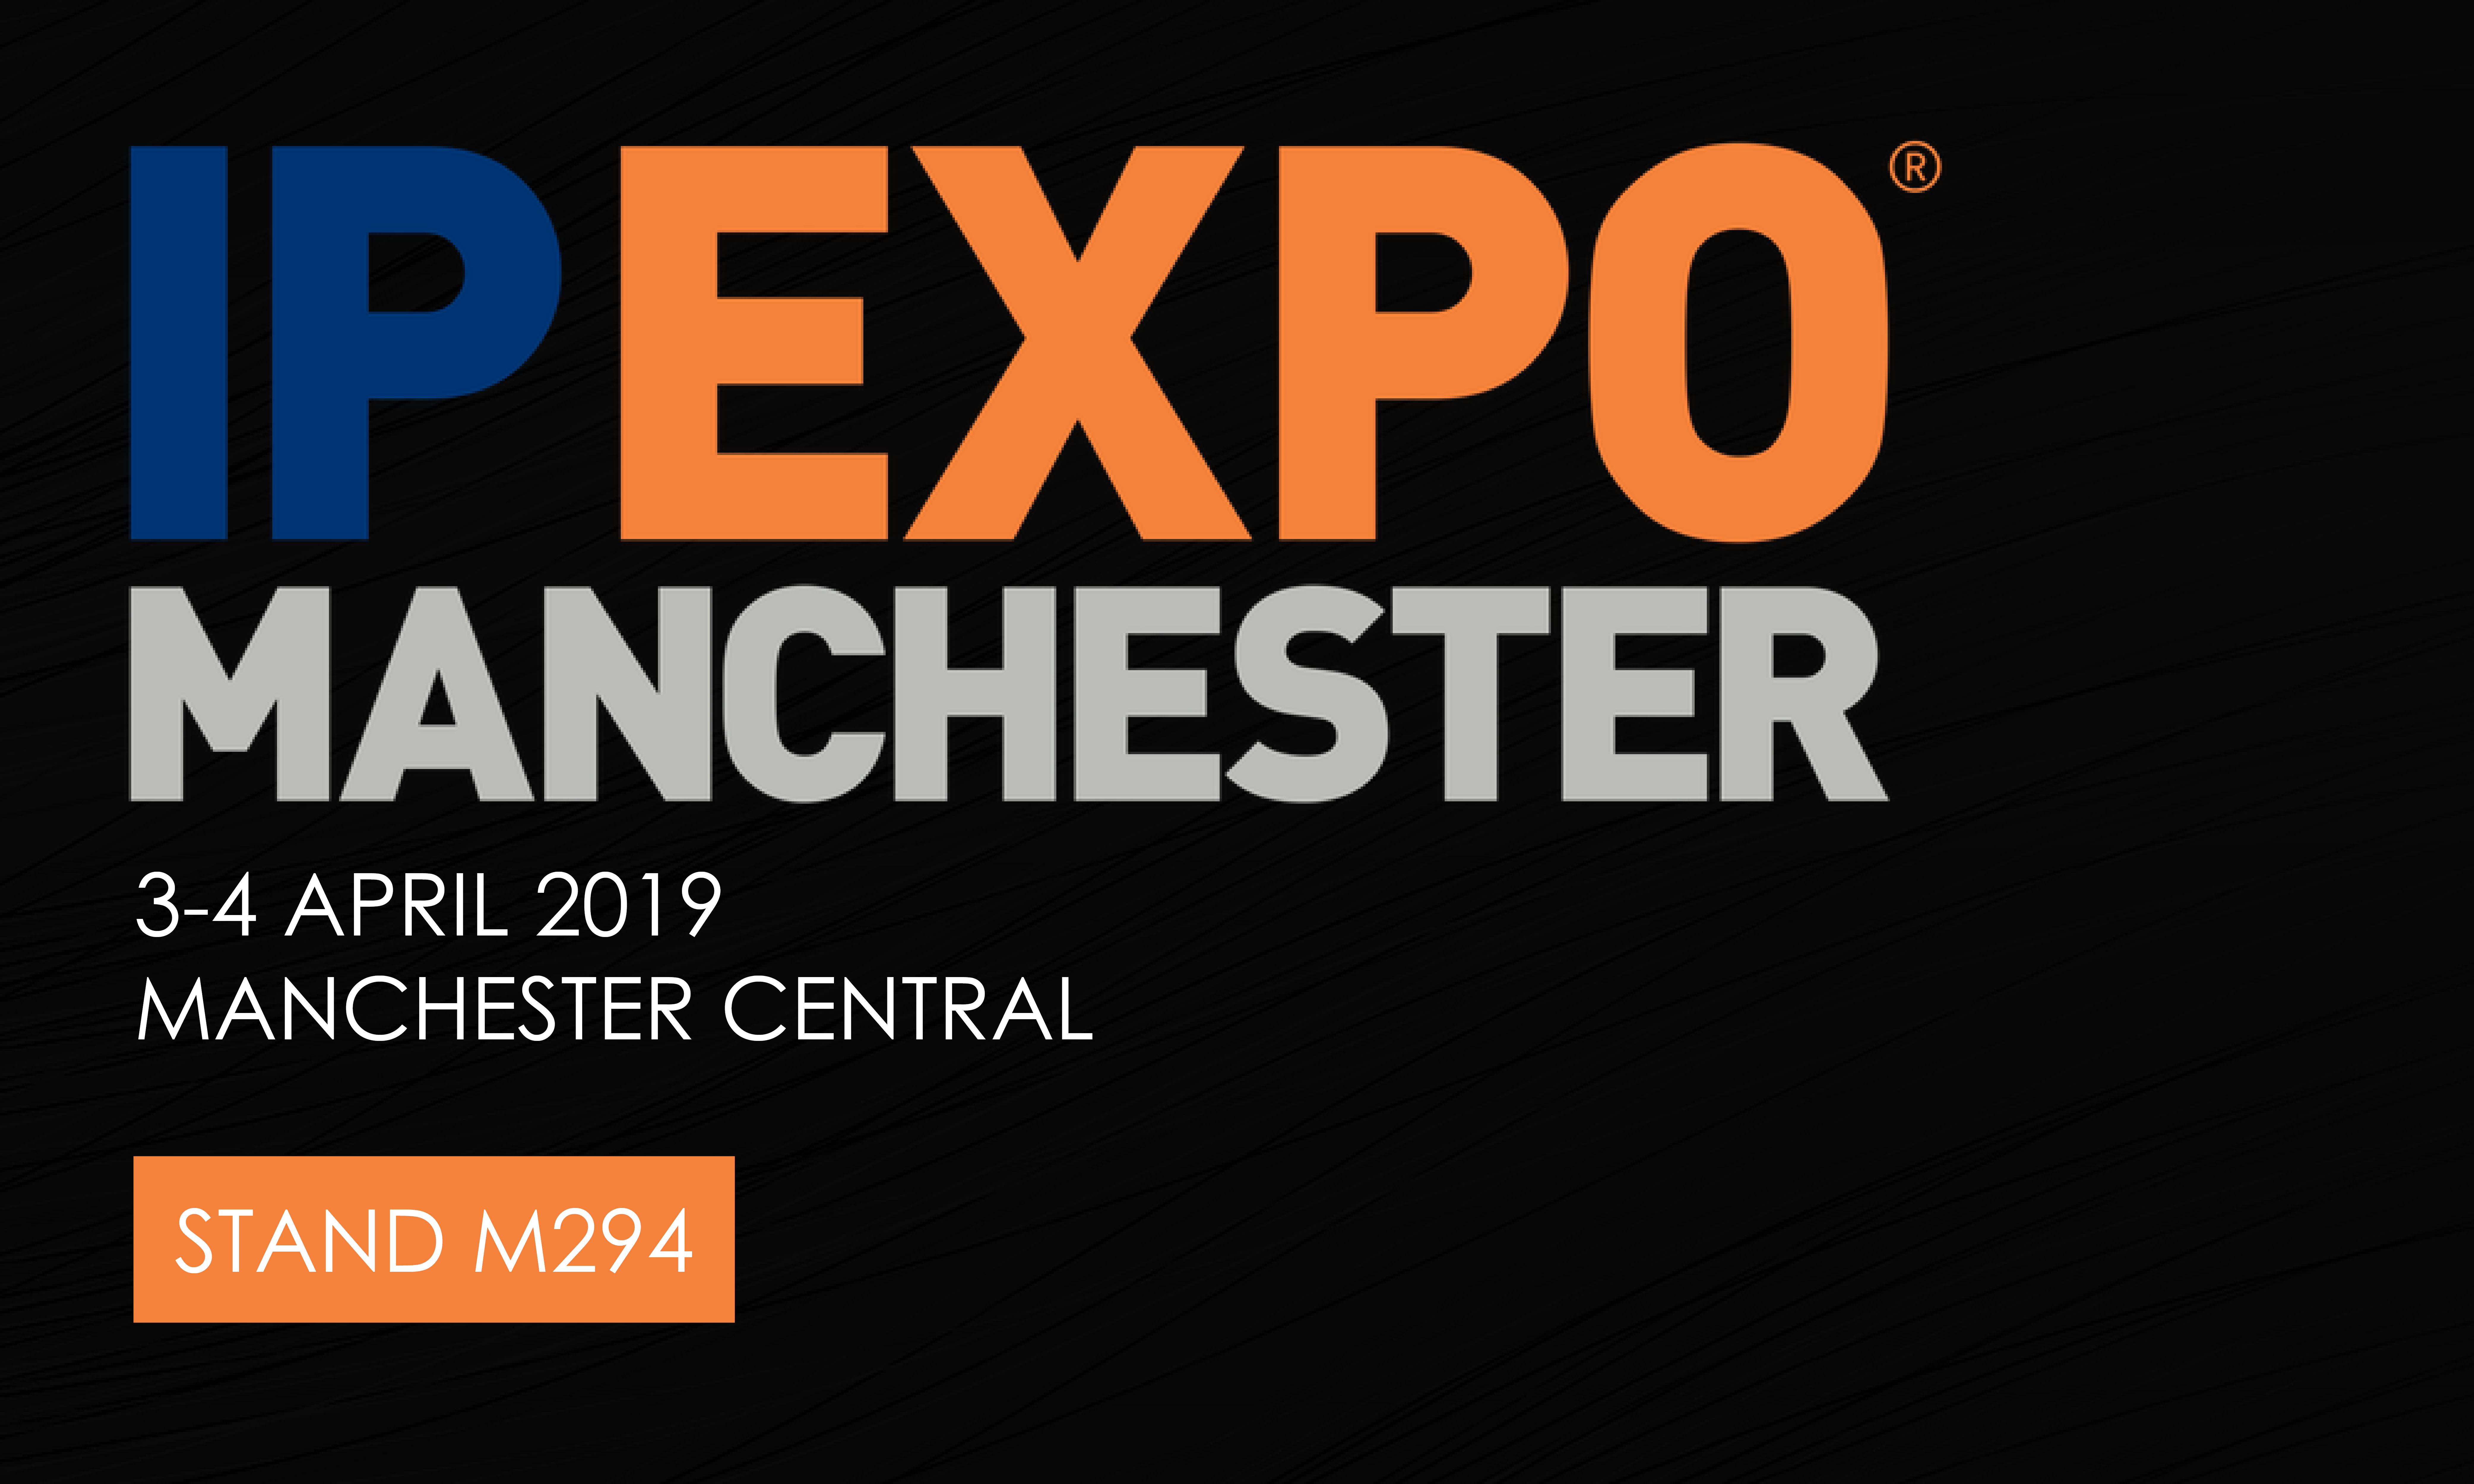 IPEXPO 2019 Manchester editorial banner